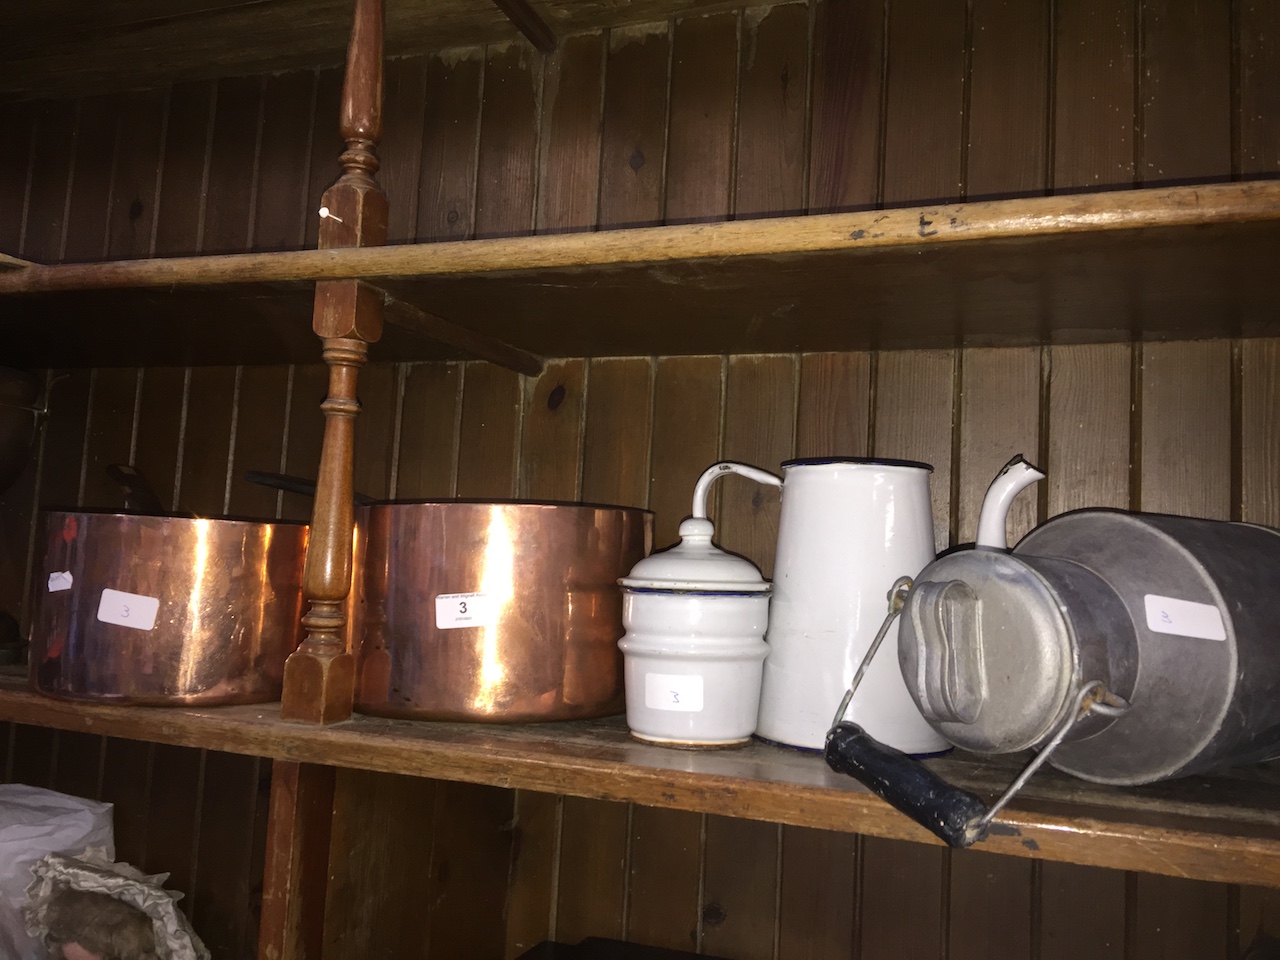 A small galvanised milk churn, 2 enameled items and 2 large copper pans.